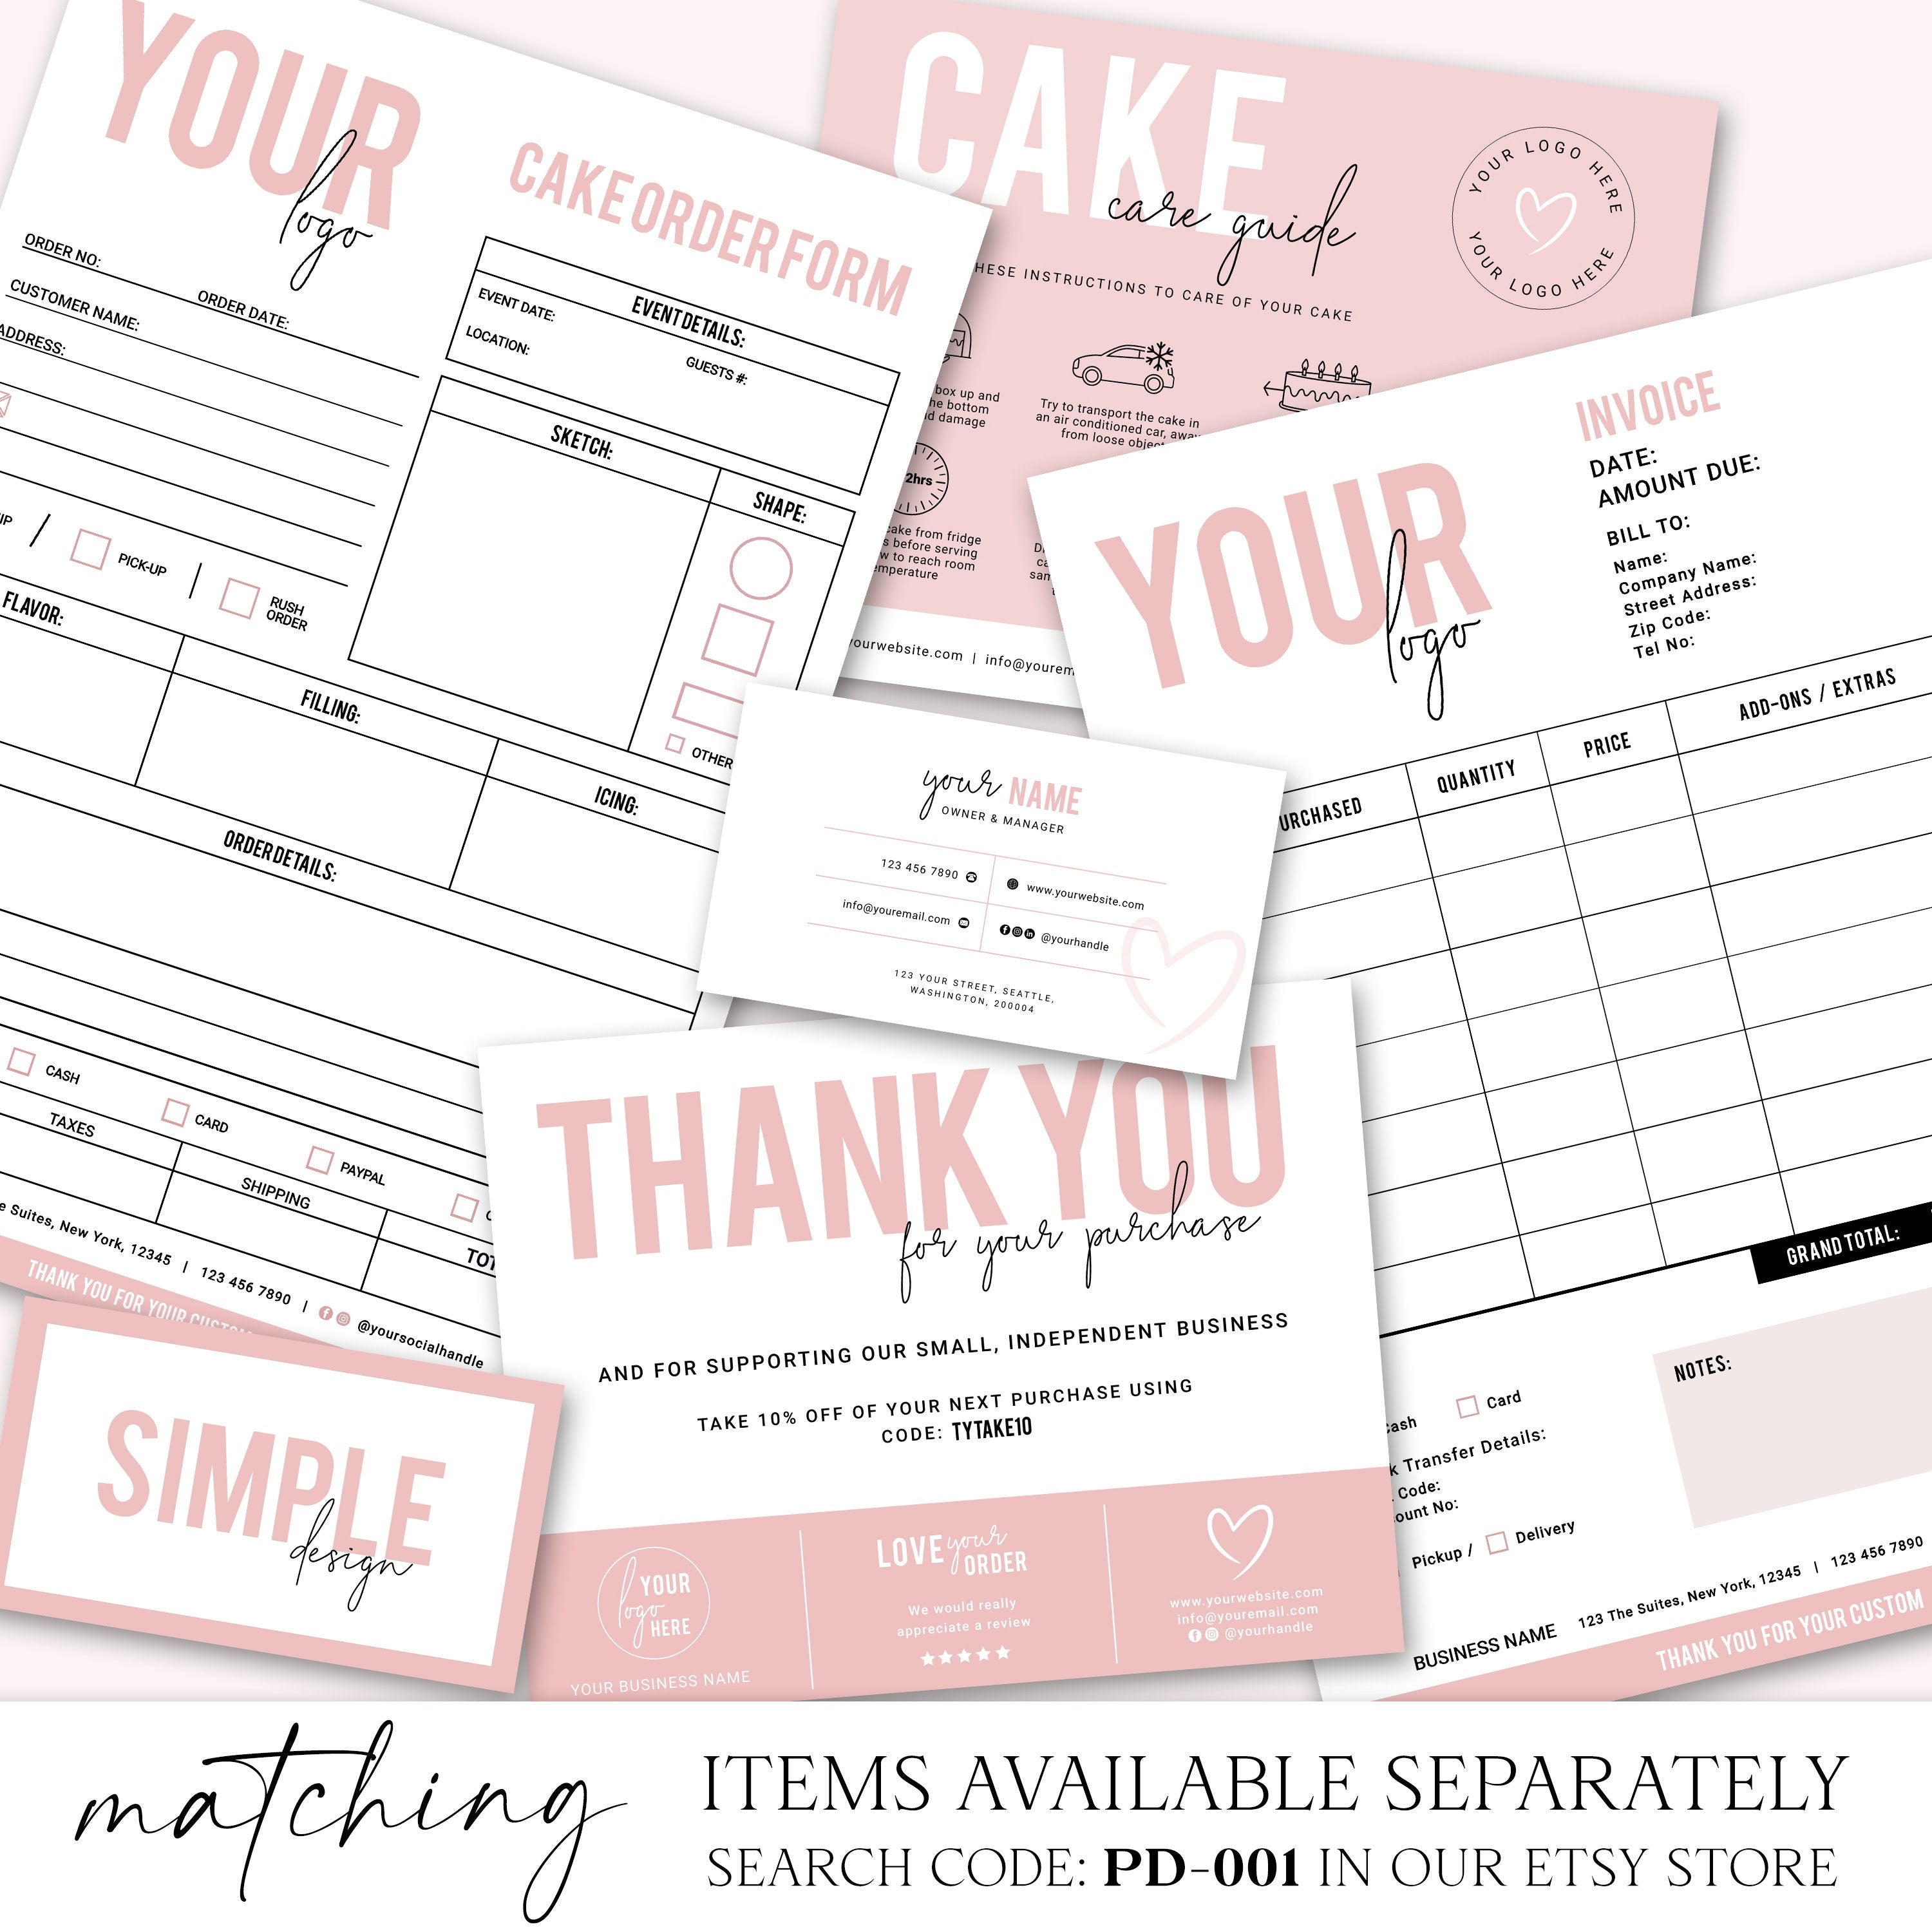 Amazon.com : Custom Cake Order Form Sheets | 50 pk | for Bakers Dessert  Wedding Birthday Party Cake Form Book Bakers Supplies Small Business  Planner 8.5x11” inches : Office Products